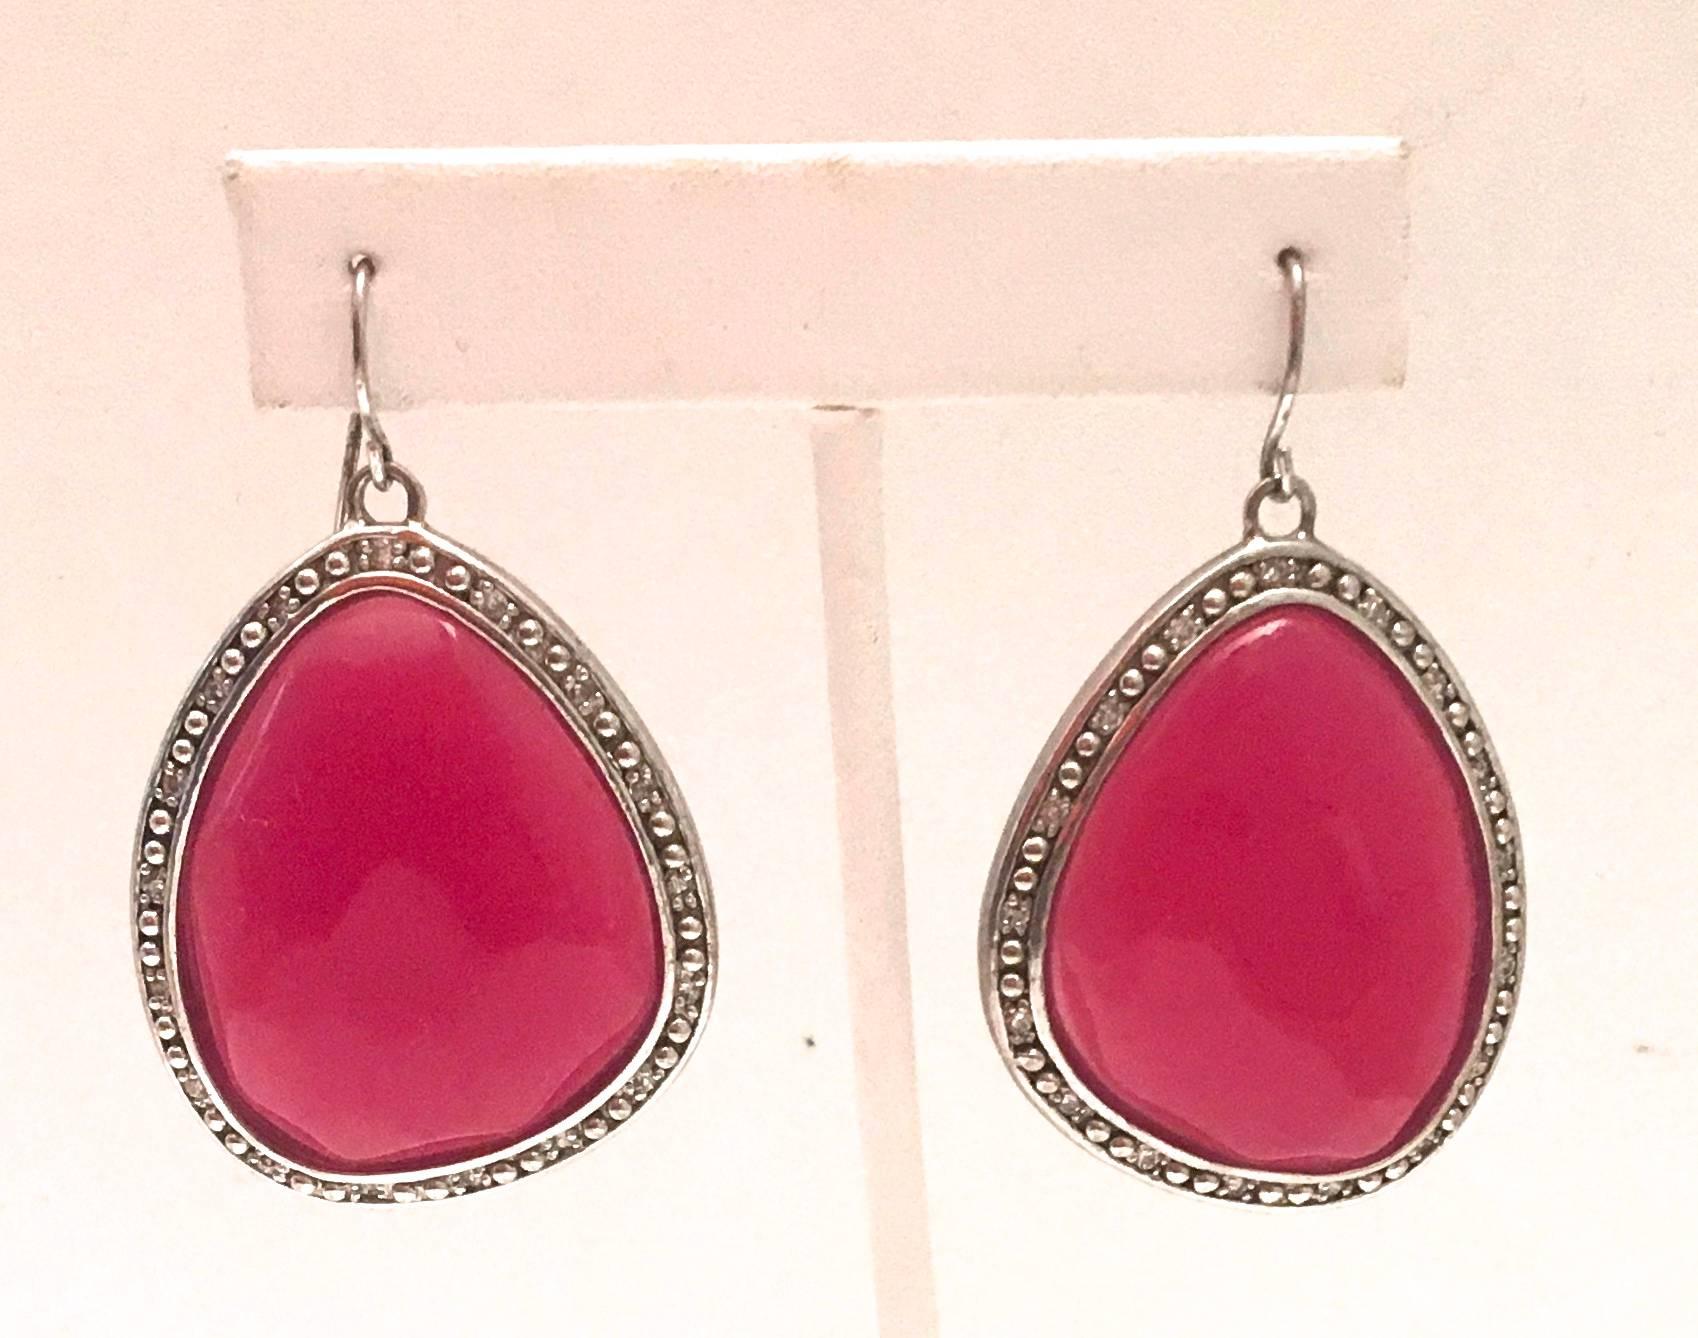 Miriam Salat Earrings - 2 Pairs - Sterling Silver In New Condition For Sale In Boca Raton, FL